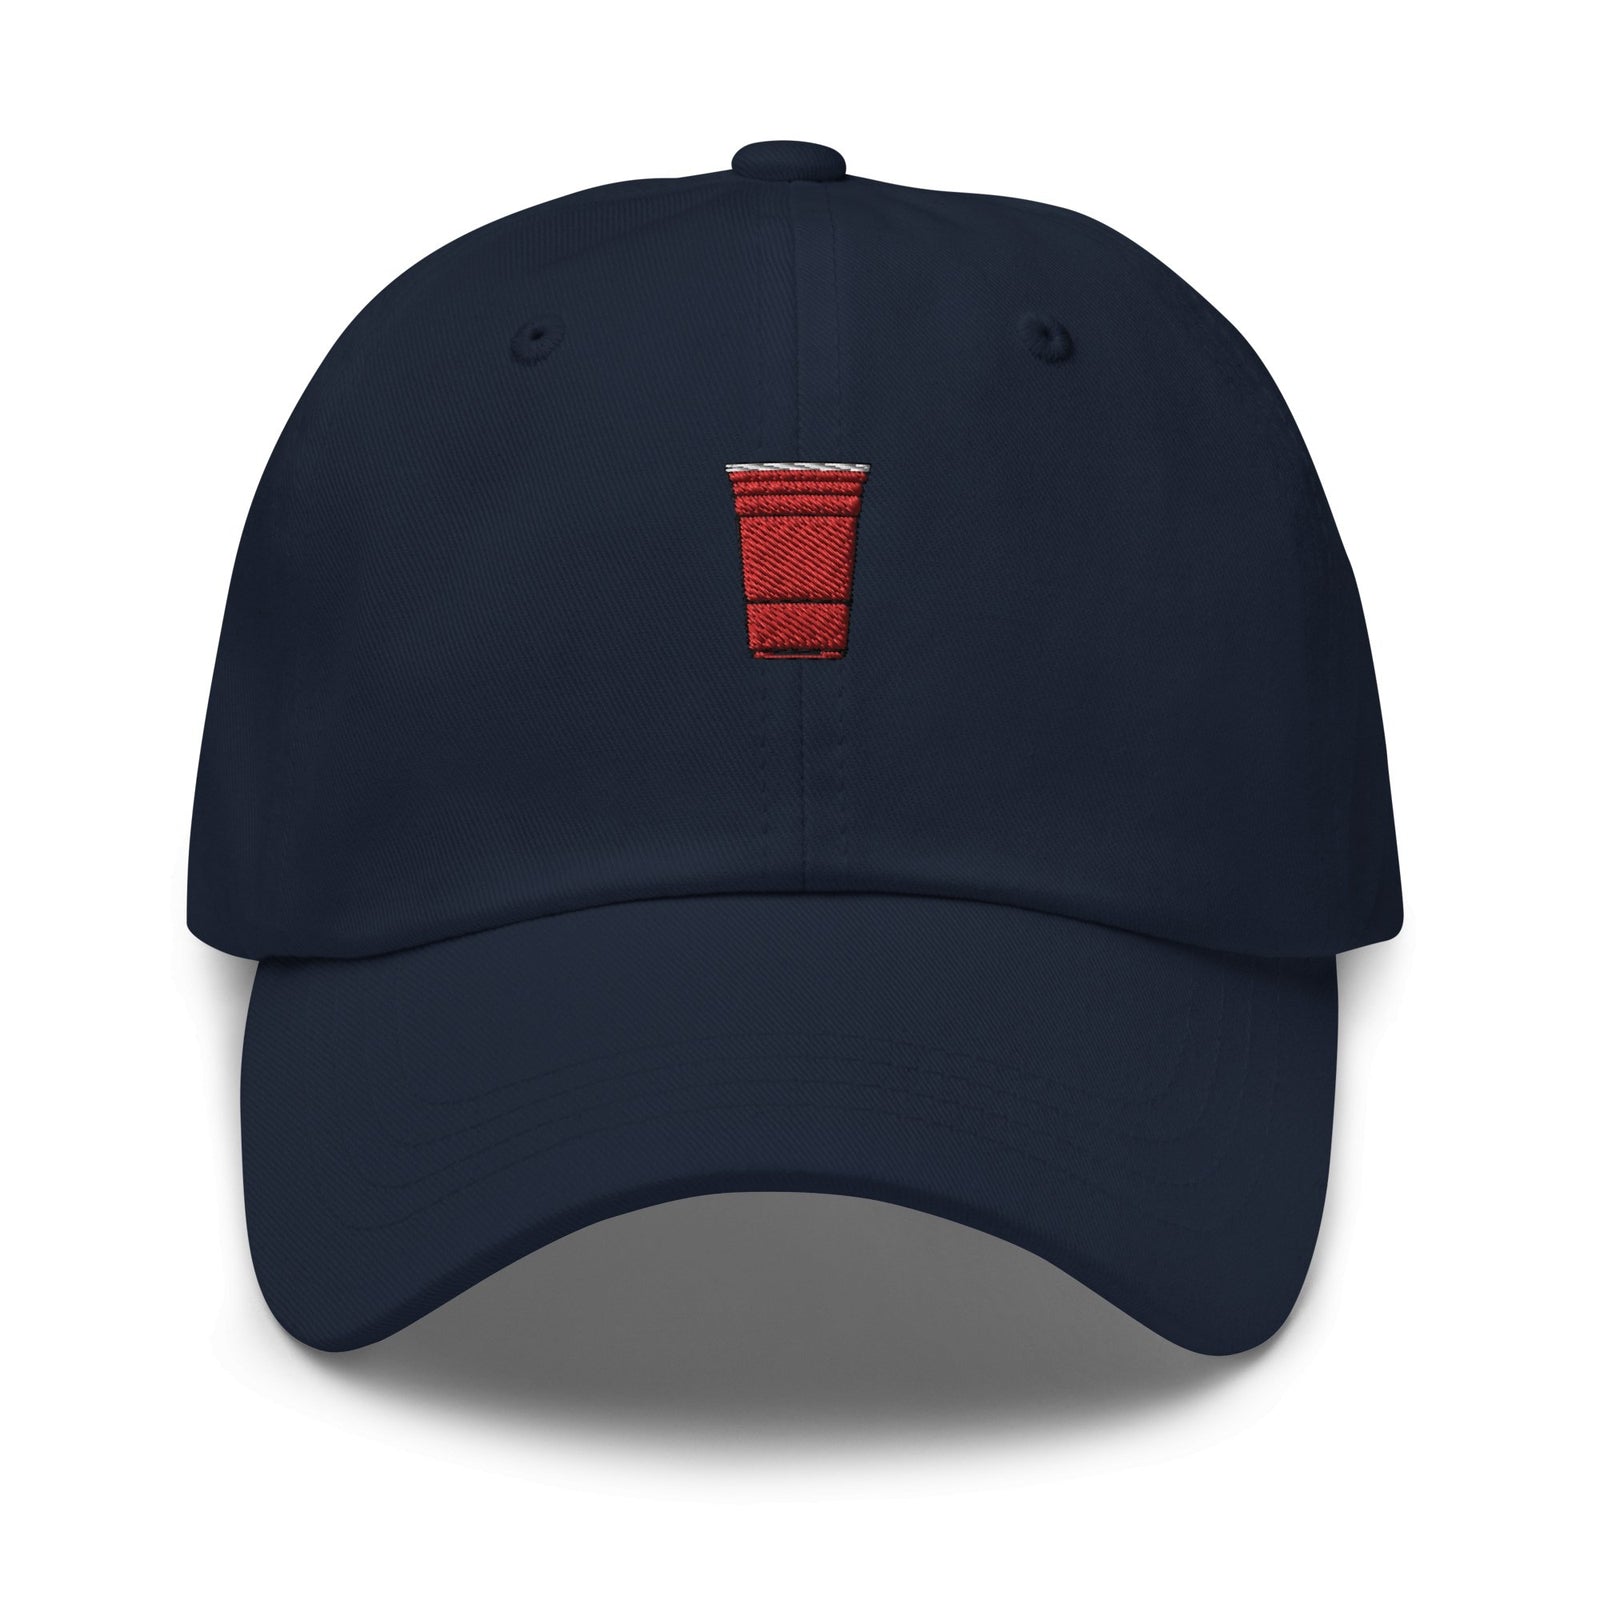 //cdn.shopify.com/s/files/1/0274/2488/2766/products/red-solo-cup-dad-hat-604060_5000x.jpg?v=1652422536 5000w,
    //cdn.shopify.com/s/files/1/0274/2488/2766/products/red-solo-cup-dad-hat-604060_4500x.jpg?v=1652422536 4500w,
    //cdn.shopify.com/s/files/1/0274/2488/2766/products/red-solo-cup-dad-hat-604060_4000x.jpg?v=1652422536 4000w,
    //cdn.shopify.com/s/files/1/0274/2488/2766/products/red-solo-cup-dad-hat-604060_3500x.jpg?v=1652422536 3500w,
    //cdn.shopify.com/s/files/1/0274/2488/2766/products/red-solo-cup-dad-hat-604060_3000x.jpg?v=1652422536 3000w,
    //cdn.shopify.com/s/files/1/0274/2488/2766/products/red-solo-cup-dad-hat-604060_2500x.jpg?v=1652422536 2500w,
    //cdn.shopify.com/s/files/1/0274/2488/2766/products/red-solo-cup-dad-hat-604060_2000x.jpg?v=1652422536 2000w,
    //cdn.shopify.com/s/files/1/0274/2488/2766/products/red-solo-cup-dad-hat-604060_1800x.jpg?v=1652422536 1800w,
    //cdn.shopify.com/s/files/1/0274/2488/2766/products/red-solo-cup-dad-hat-604060_1600x.jpg?v=1652422536 1600w,
    //cdn.shopify.com/s/files/1/0274/2488/2766/products/red-solo-cup-dad-hat-604060_1400x.jpg?v=1652422536 1400w,
    //cdn.shopify.com/s/files/1/0274/2488/2766/products/red-solo-cup-dad-hat-604060_1200x.jpg?v=1652422536 1200w,
    //cdn.shopify.com/s/files/1/0274/2488/2766/products/red-solo-cup-dad-hat-604060_1000x.jpg?v=1652422536 1000w,
    //cdn.shopify.com/s/files/1/0274/2488/2766/products/red-solo-cup-dad-hat-604060_800x.jpg?v=1652422536 800w,
    //cdn.shopify.com/s/files/1/0274/2488/2766/products/red-solo-cup-dad-hat-604060_600x.jpg?v=1652422536 600w,
    //cdn.shopify.com/s/files/1/0274/2488/2766/products/red-solo-cup-dad-hat-604060_400x.jpg?v=1652422536 400w,
    //cdn.shopify.com/s/files/1/0274/2488/2766/products/red-solo-cup-dad-hat-604060_200x.jpg?v=1652422536 200w